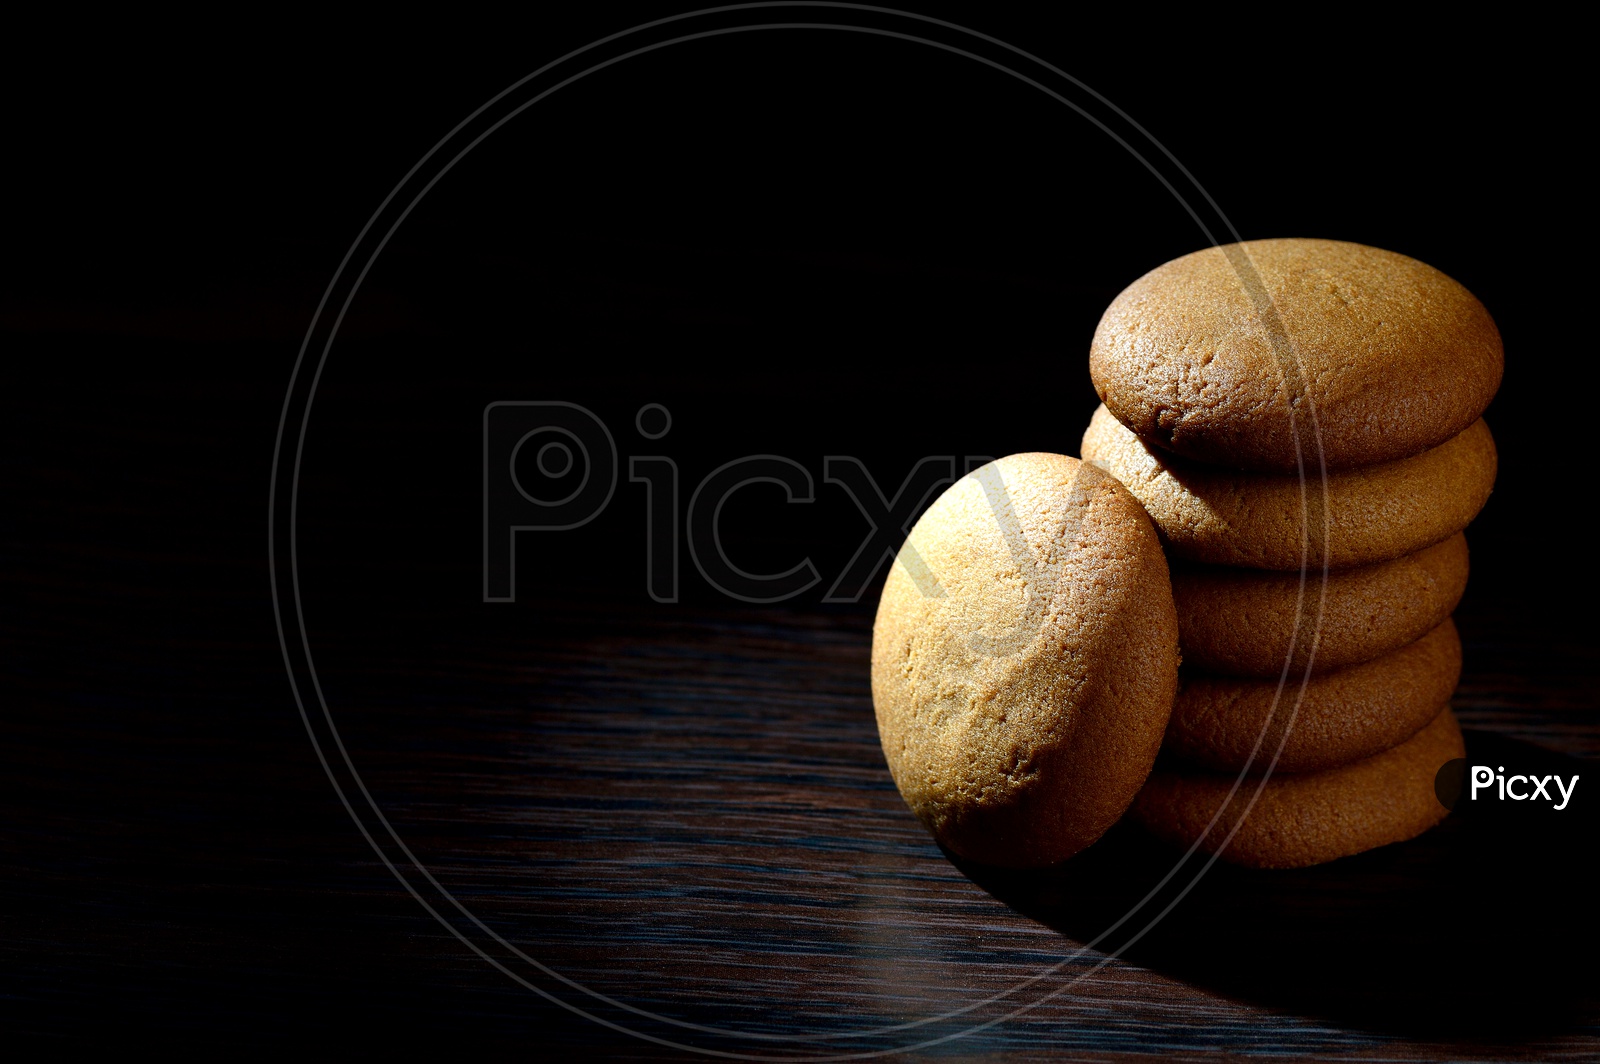 BISCUITS - Stack of delicious cream biscuits filled with chocolate cream on black background